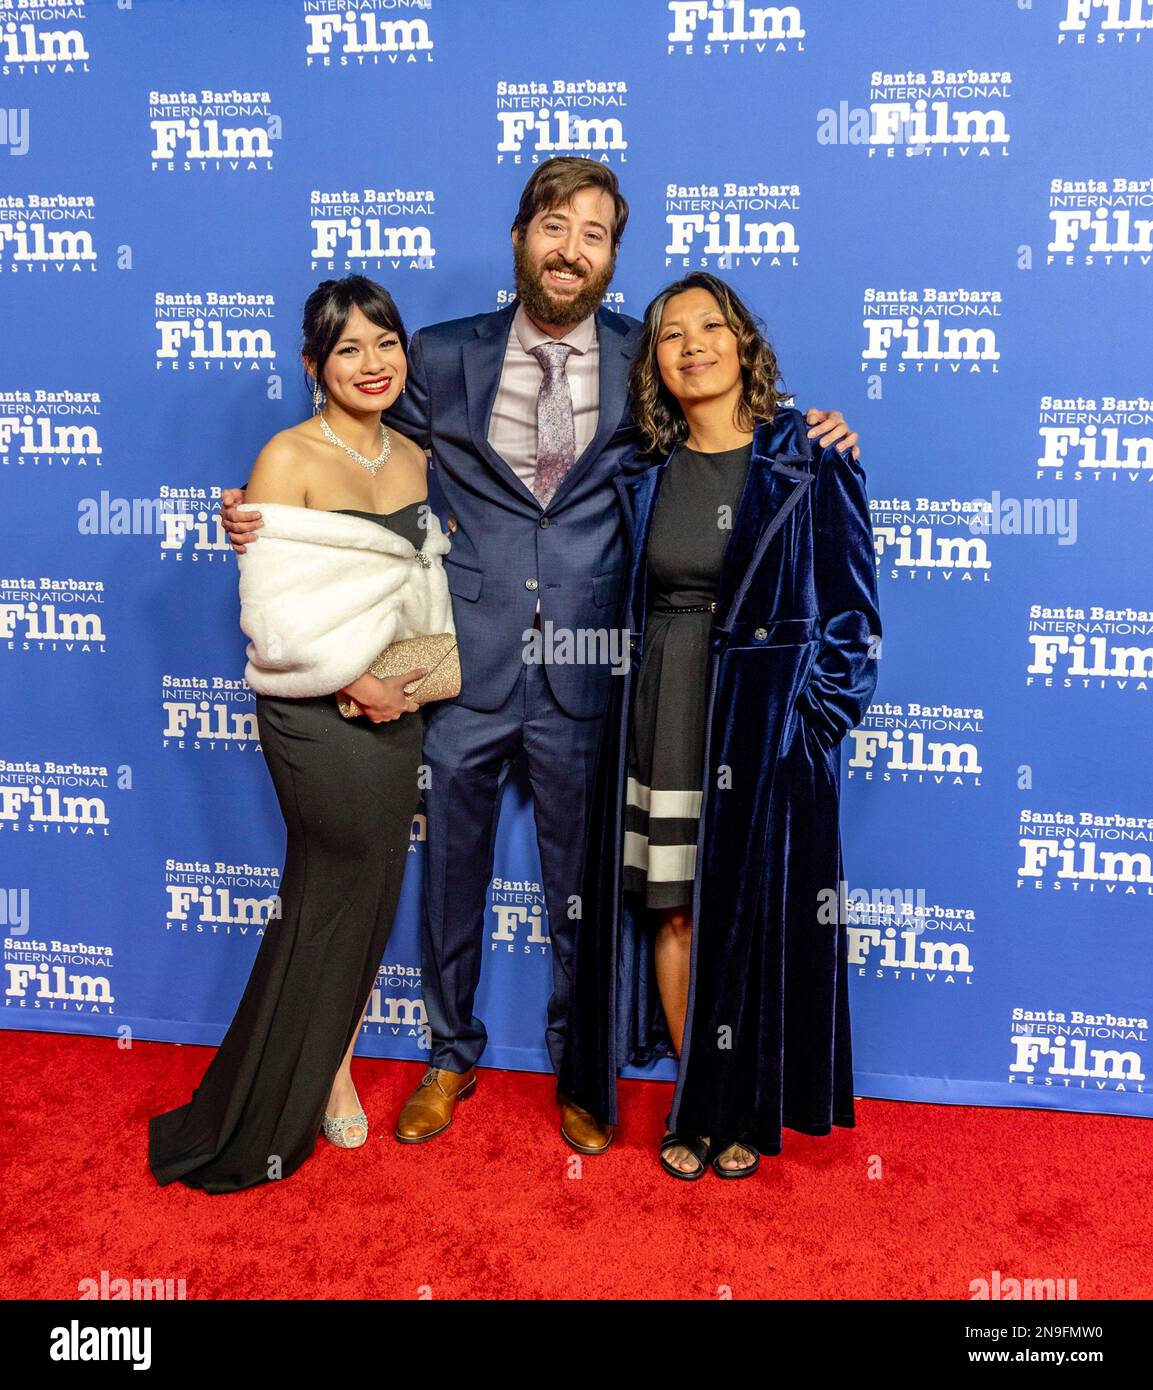 Santa Barbara, USA. 11th Feb, 2023. (l-r) Chrisna Chhor, Frank Martinez and Caylee So (The Harvest) arrive at the 2023 Santa Barbara International Film Festival red carpet event to honor Jamie Lee Curtis with the Maltin Modern Master Award at the Arlington Theatre on February 11, 2023 in Santa Barbara, CA. (Photo by Rod Rolle/Sipa USA) Credit: Sipa USA/Alamy Live News Stock Photo